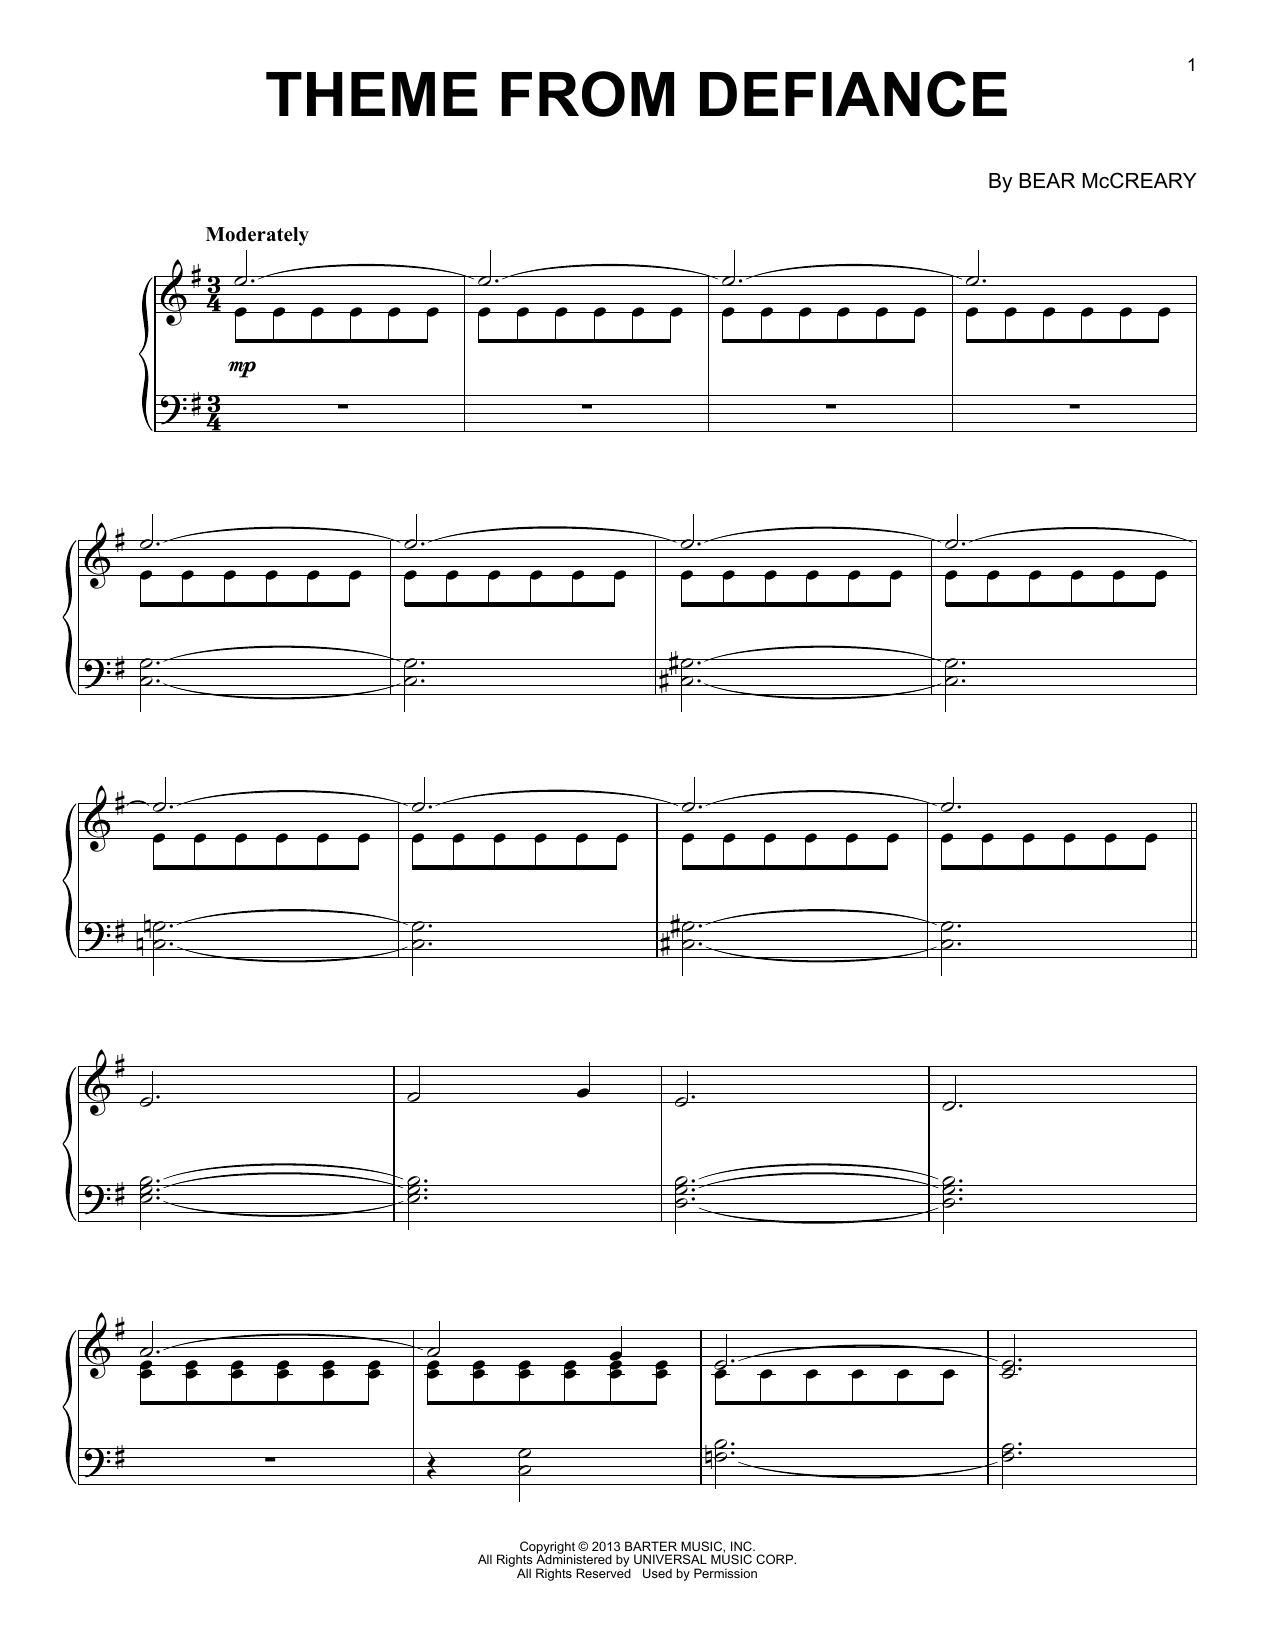 Bear McCreary Theme From Defiance sheet music notes printable PDF score